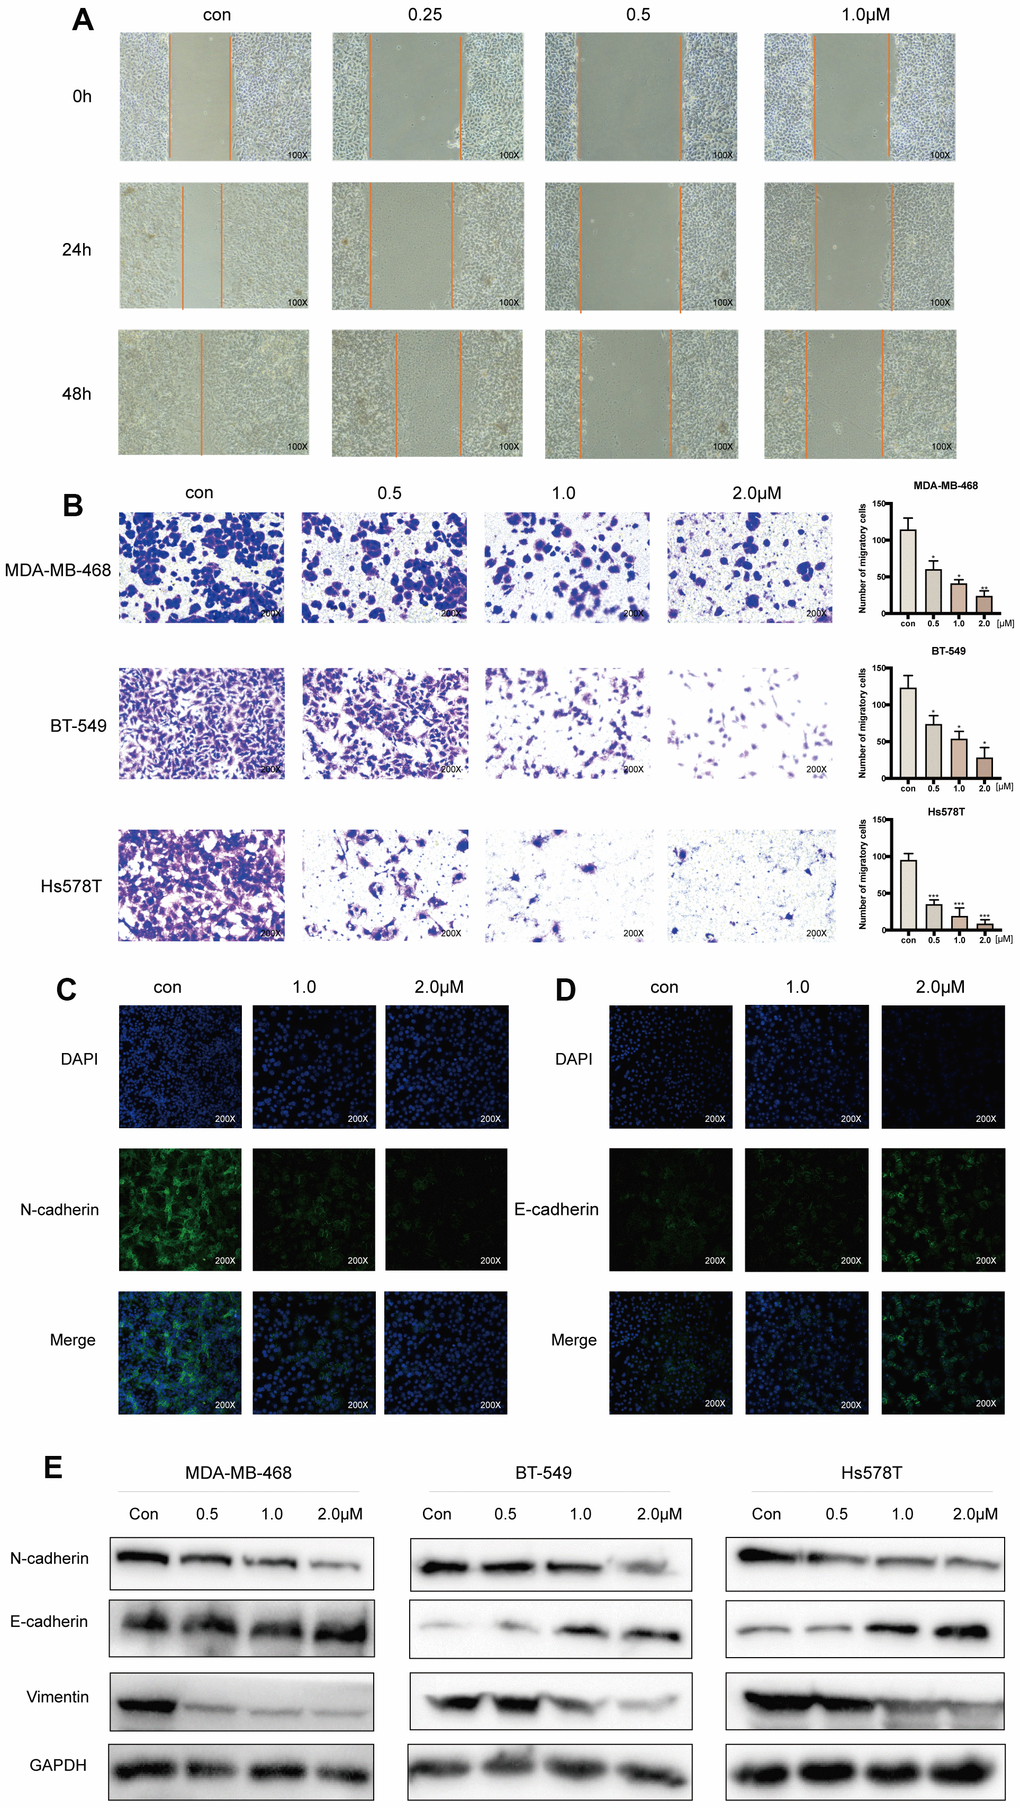 Acetyl-cinobufagin inhibits the migration of TNBC cells. (A) Wound healing assay was performed using the BT-549 cells with/without acetyl-cinobufagin treatment. (B) Transwell migration assay was performed with the MDA-MB-468, BT-549 and Hs578T cells. (C, D) Changes in the expression of EMT marker proteins (E-cadherin and N-cadherin) in Bt-549 cells were verified by immunofluorescence staining. (E) Expression of proteins related to the EMT signaling pathways as identified by Western blotting. *p p p 